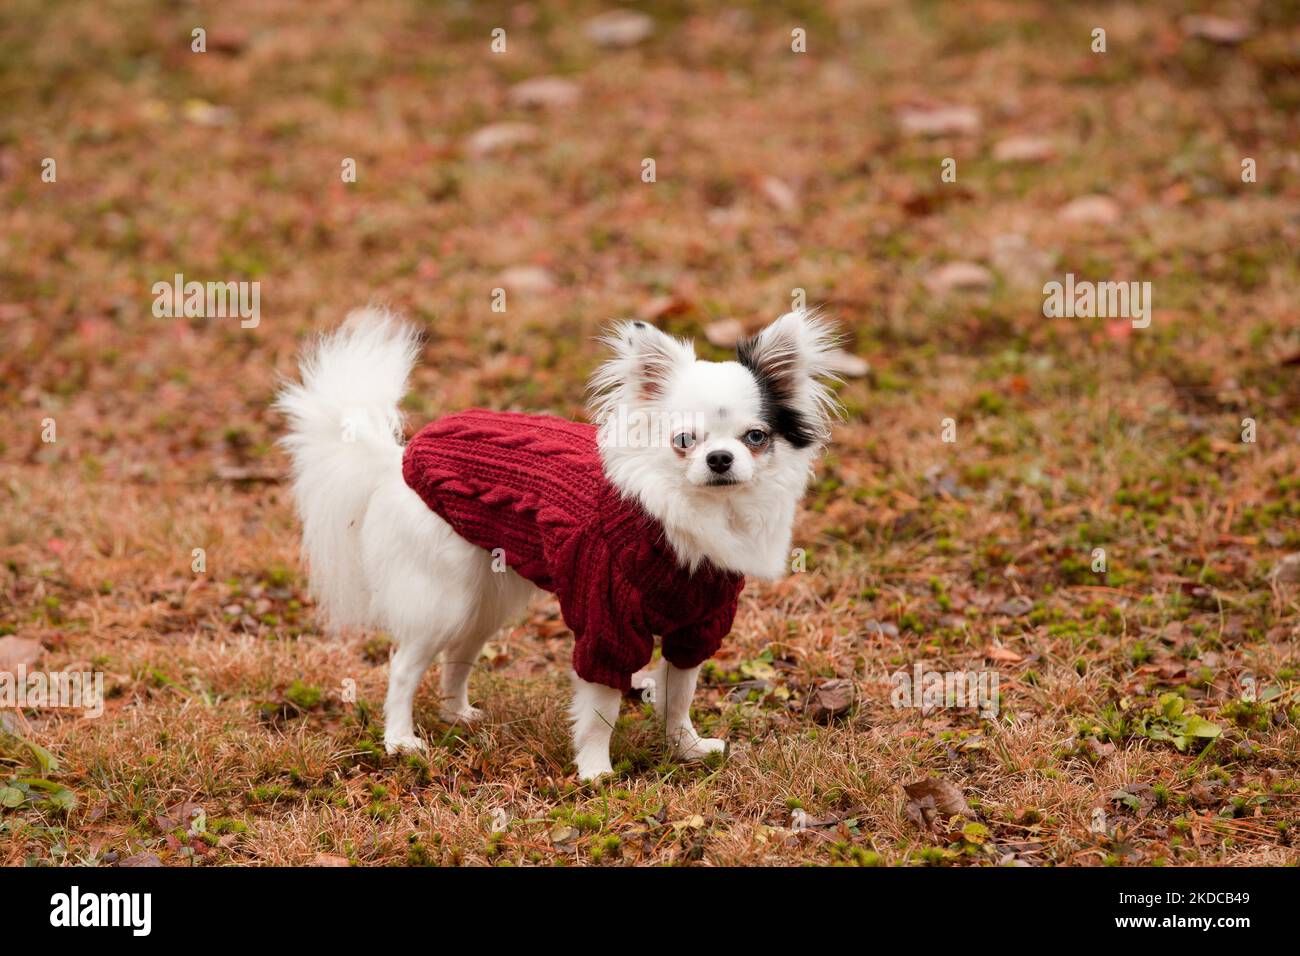 Beautiful long hair Chihuahua with a red woollen sweater in the fall season. White and black longhair Chihuahua sporting a red outfit in the autumn le Stock Photo